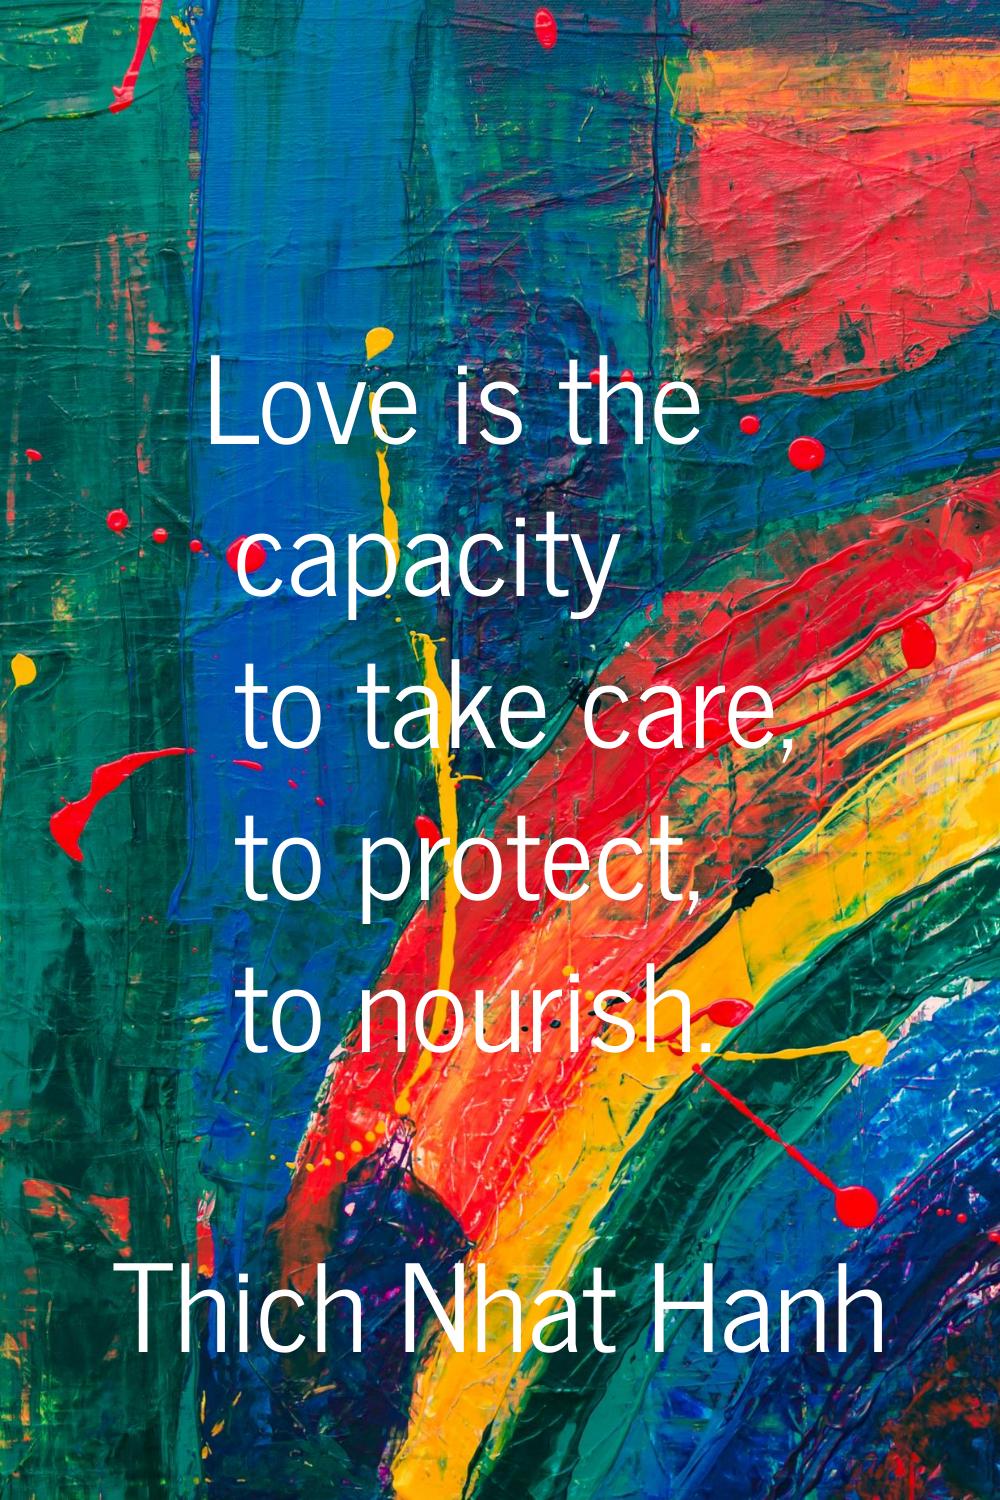 Love is the capacity to take care, to protect, to nourish.